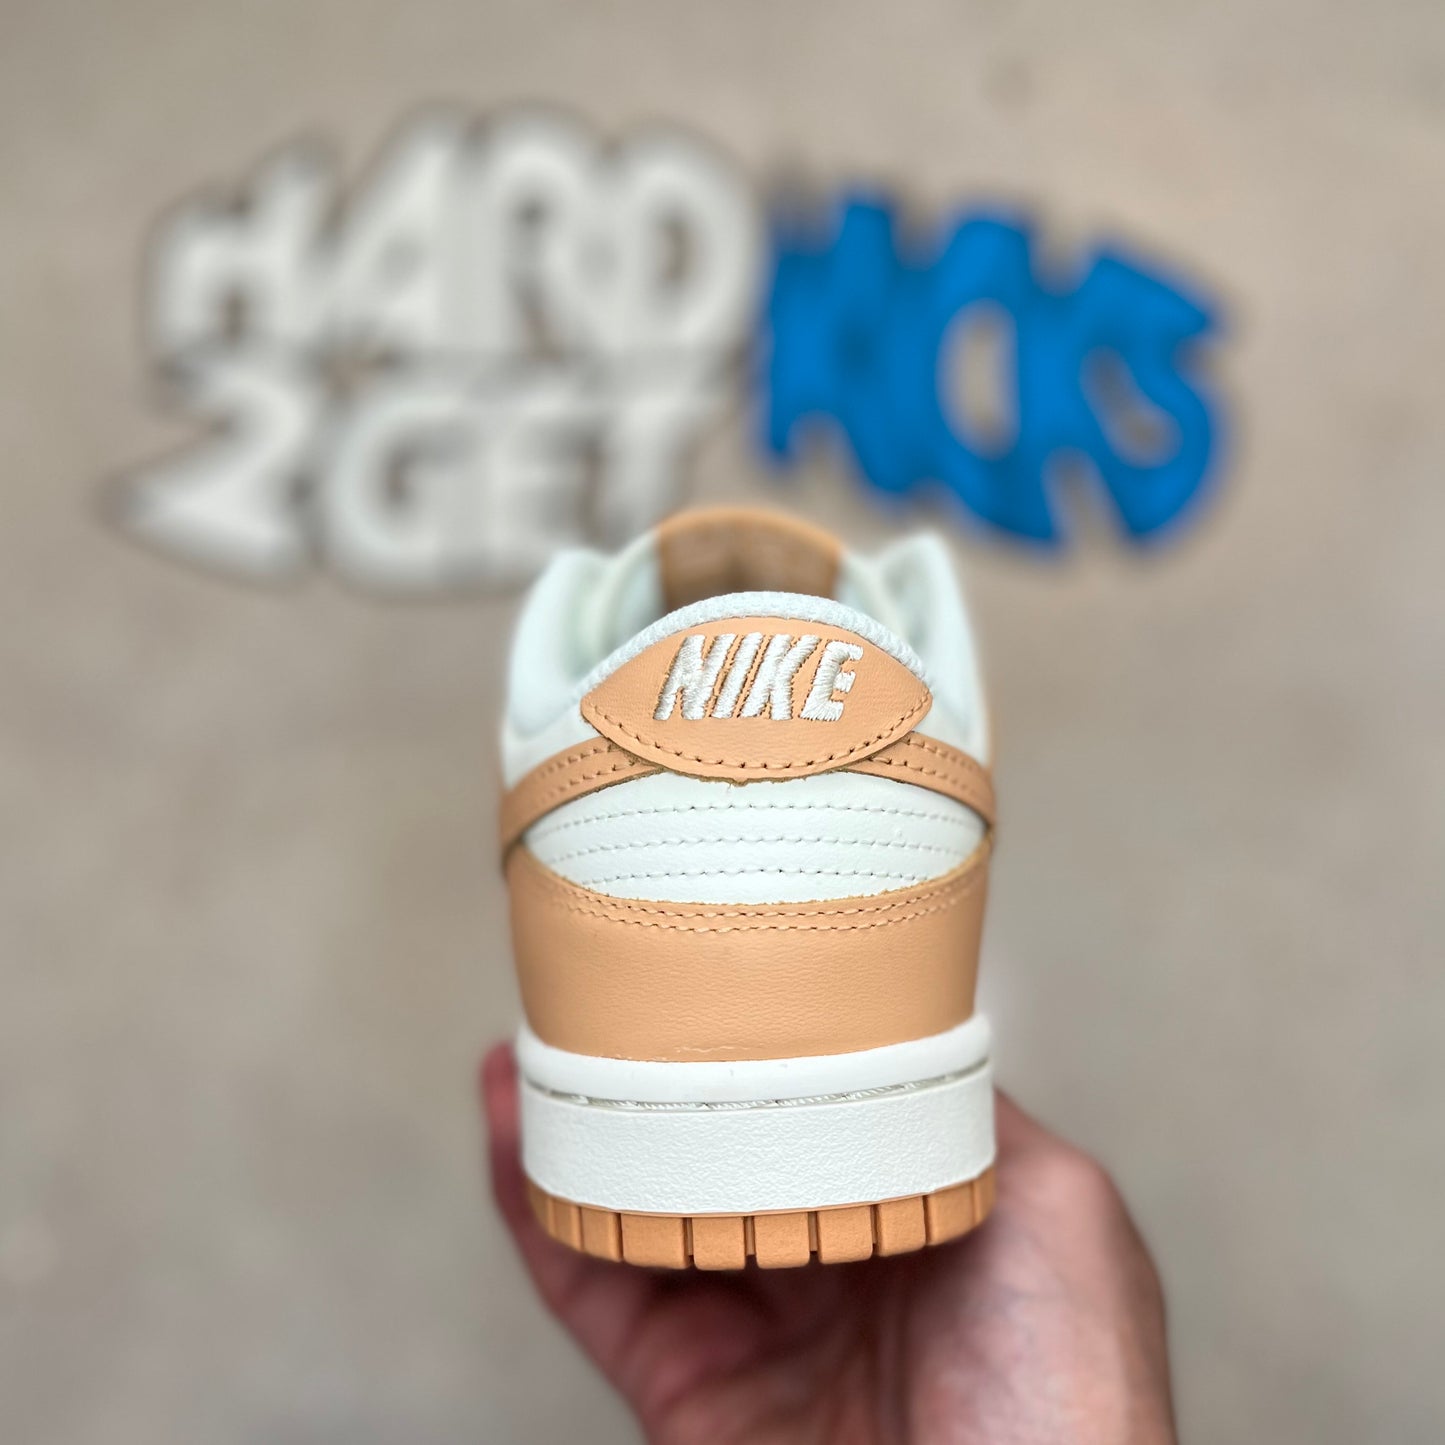 Wmns Nike Dunk Low - Harvest Moon